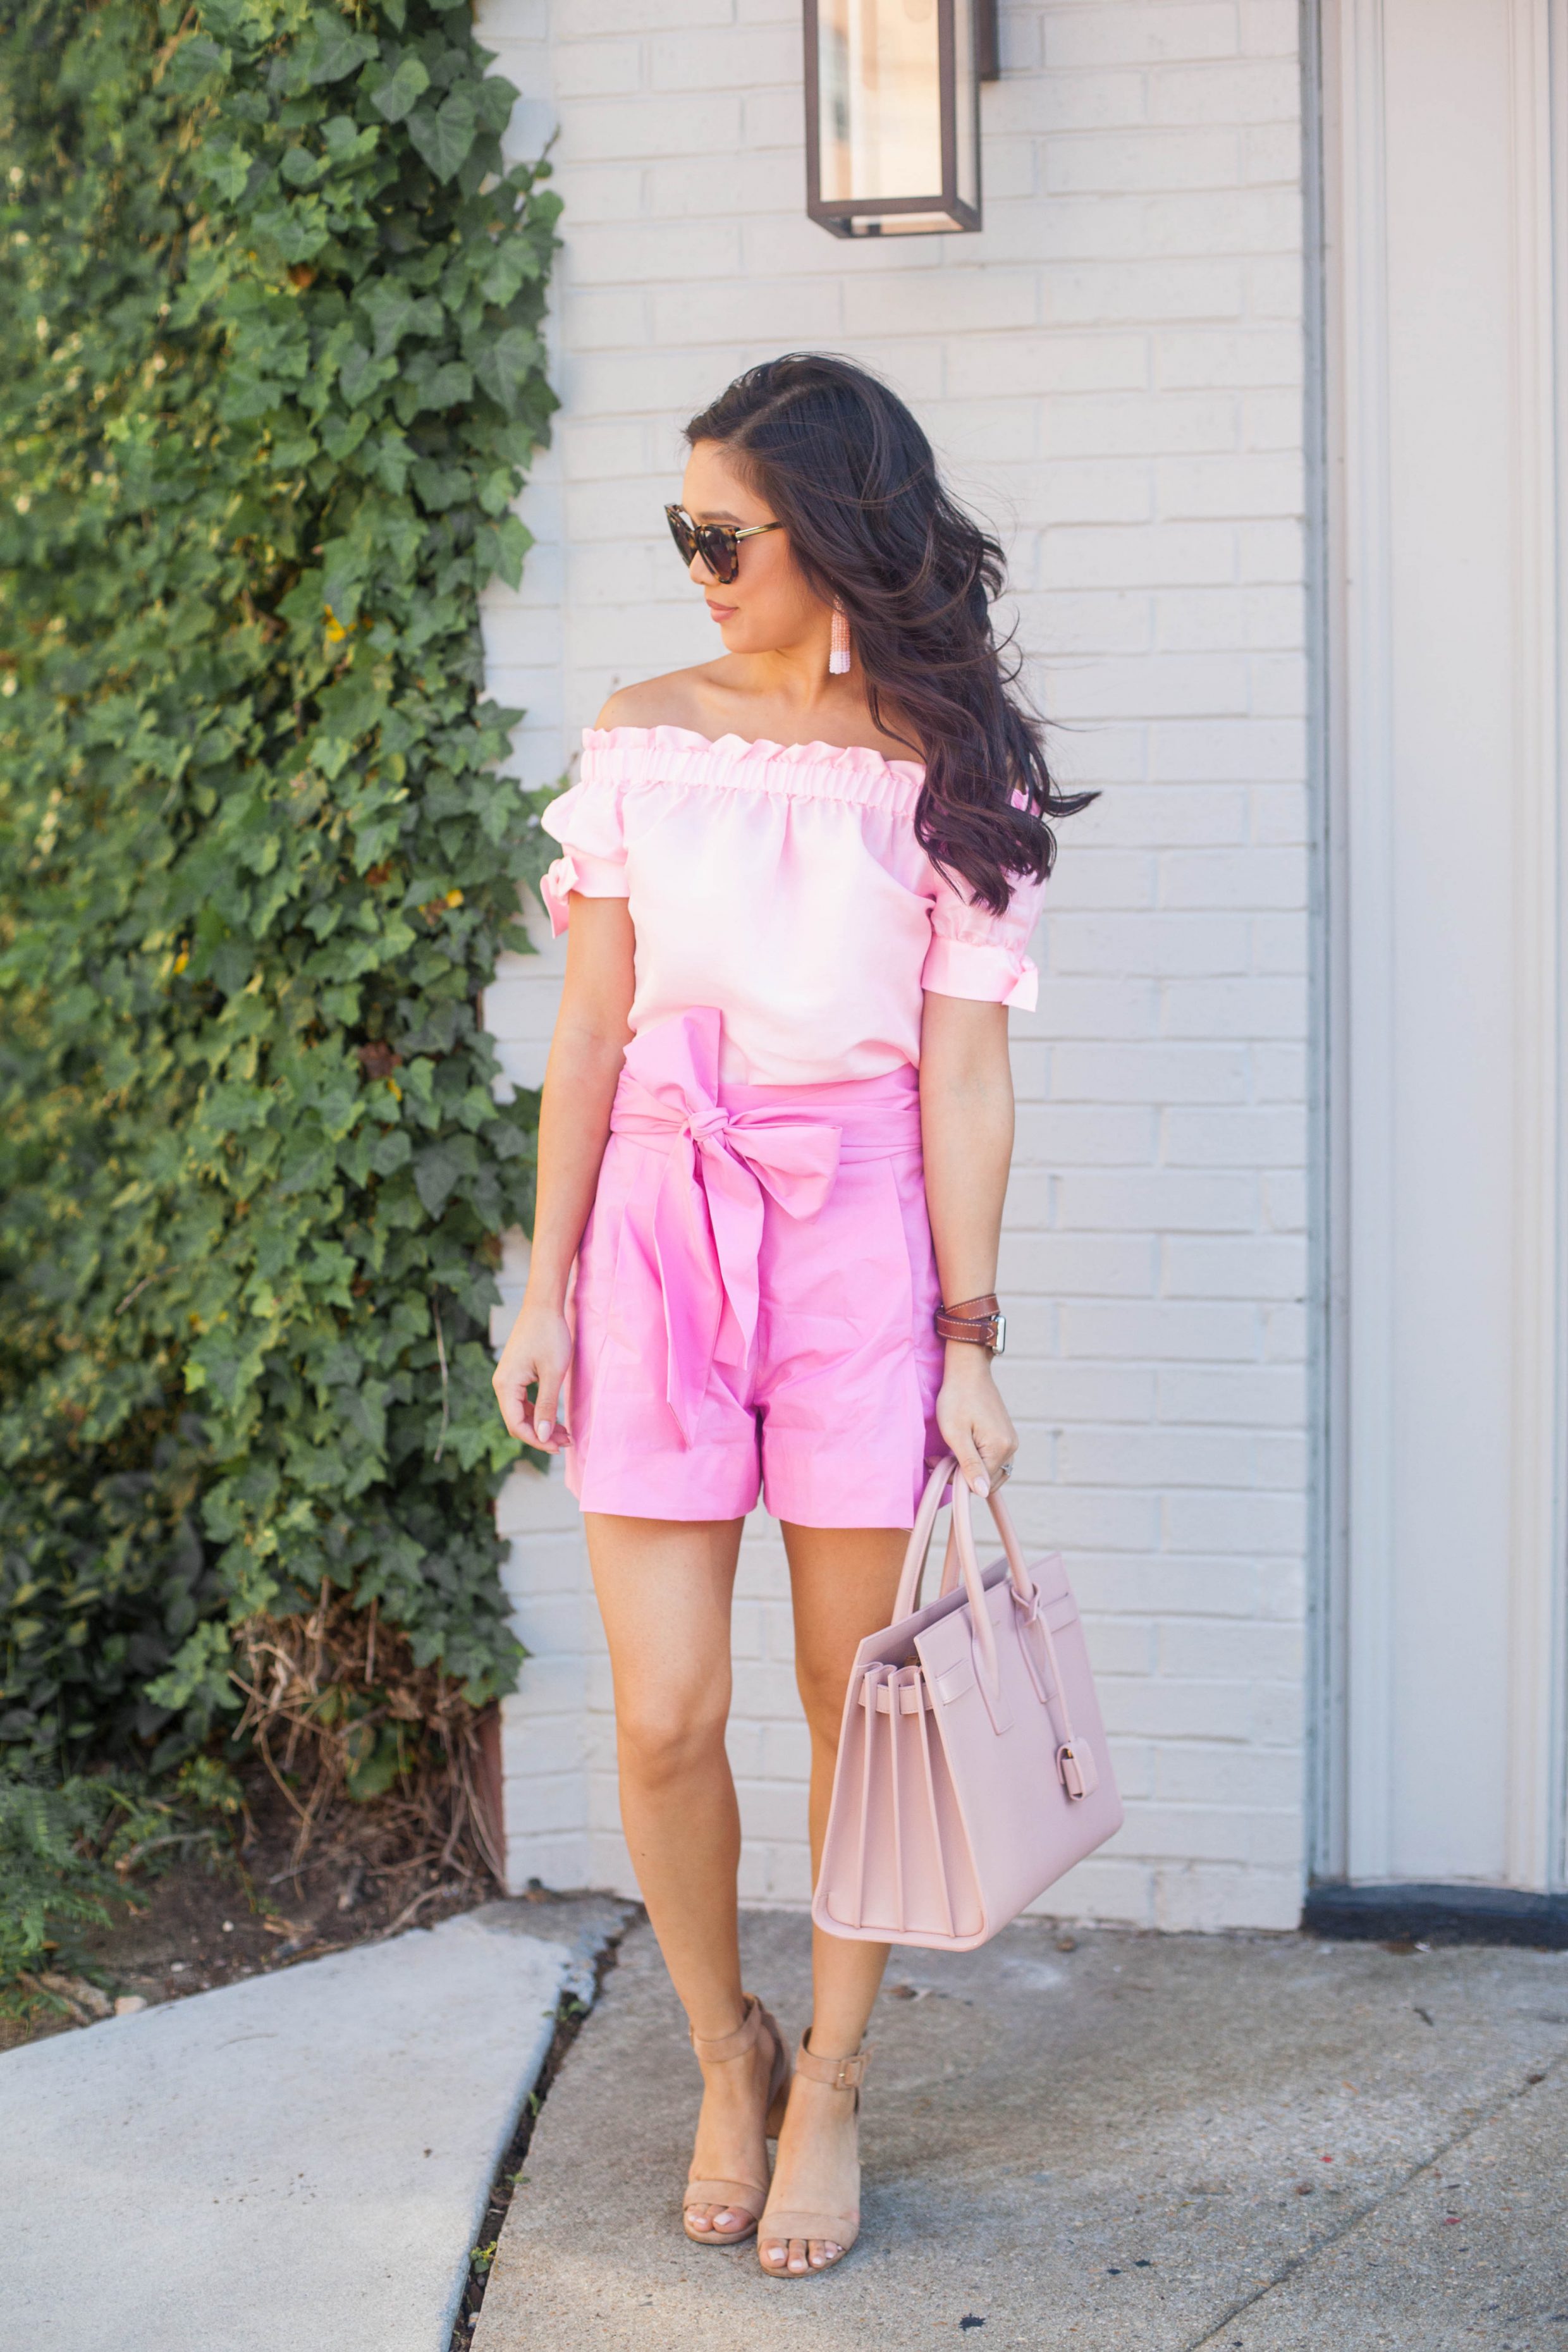 COLOR & CHIC | Pink off the shoulder top and pink bow tie shorts with Saint Laurent Sac de Jour